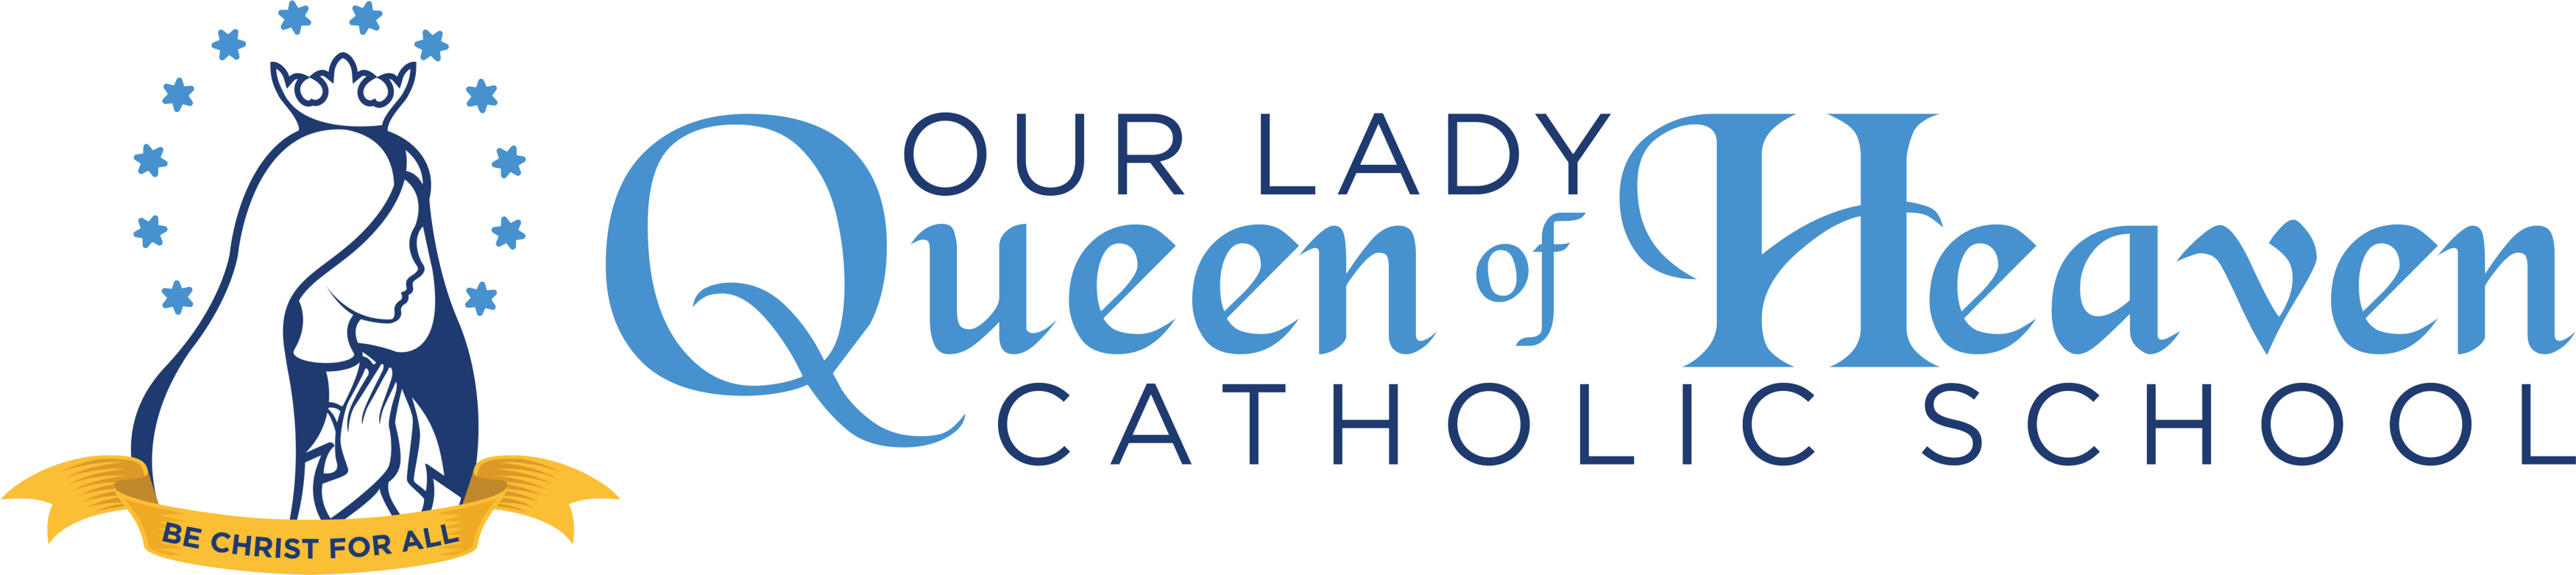 Logo for Our Lady Queen of Heaven